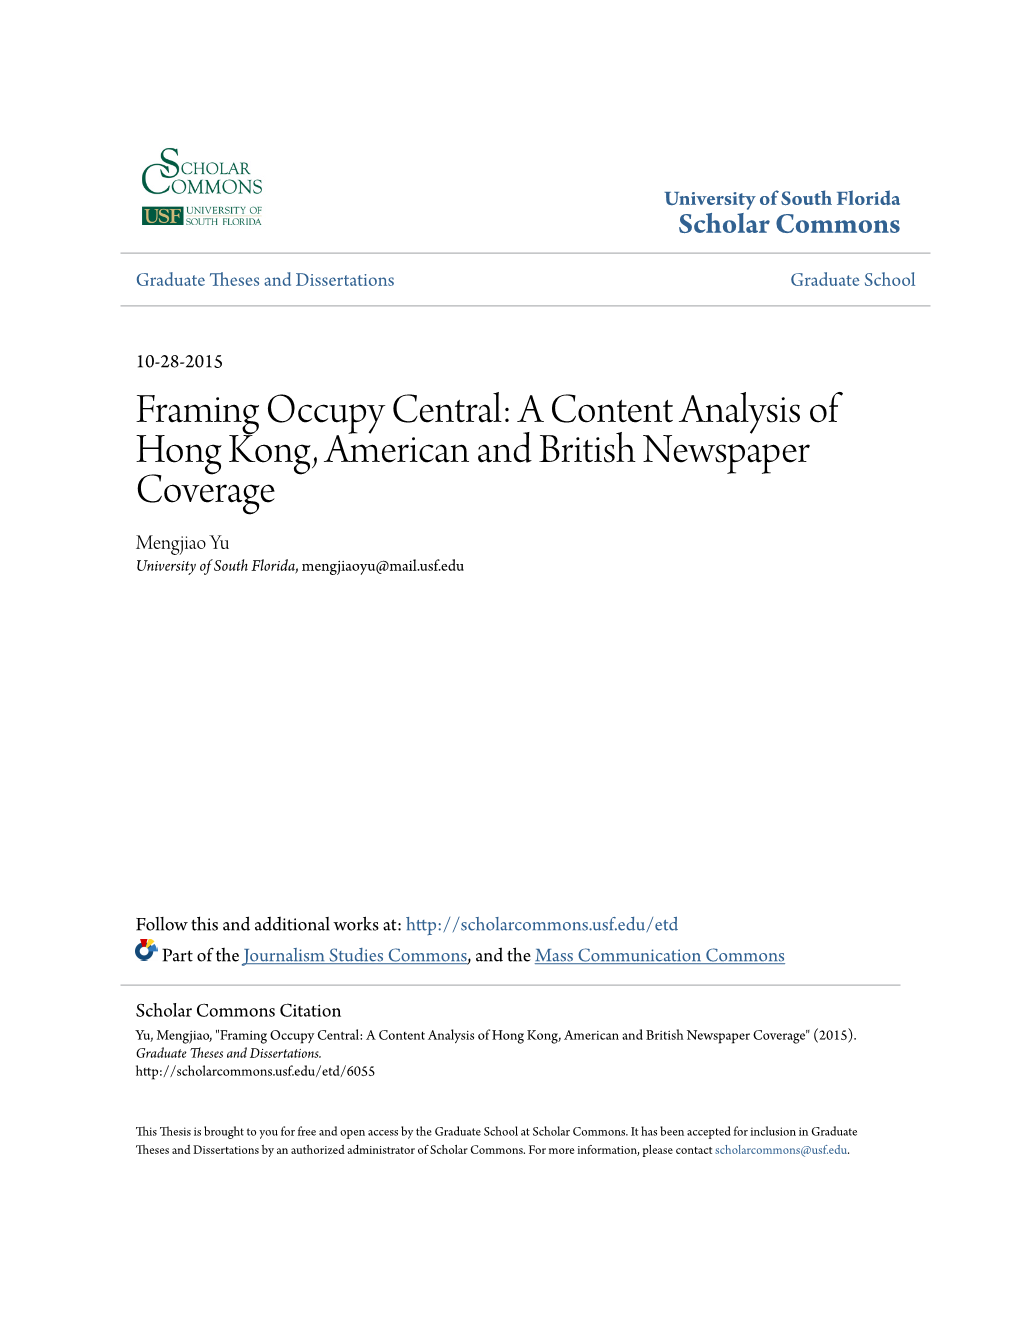 Framing Occupy Central: a Content Analysis of Hong Kong, American and British Newspaper Coverage Mengjiao Yu University of South Florida, Mengjiaoyu@Mail.Usf.Edu